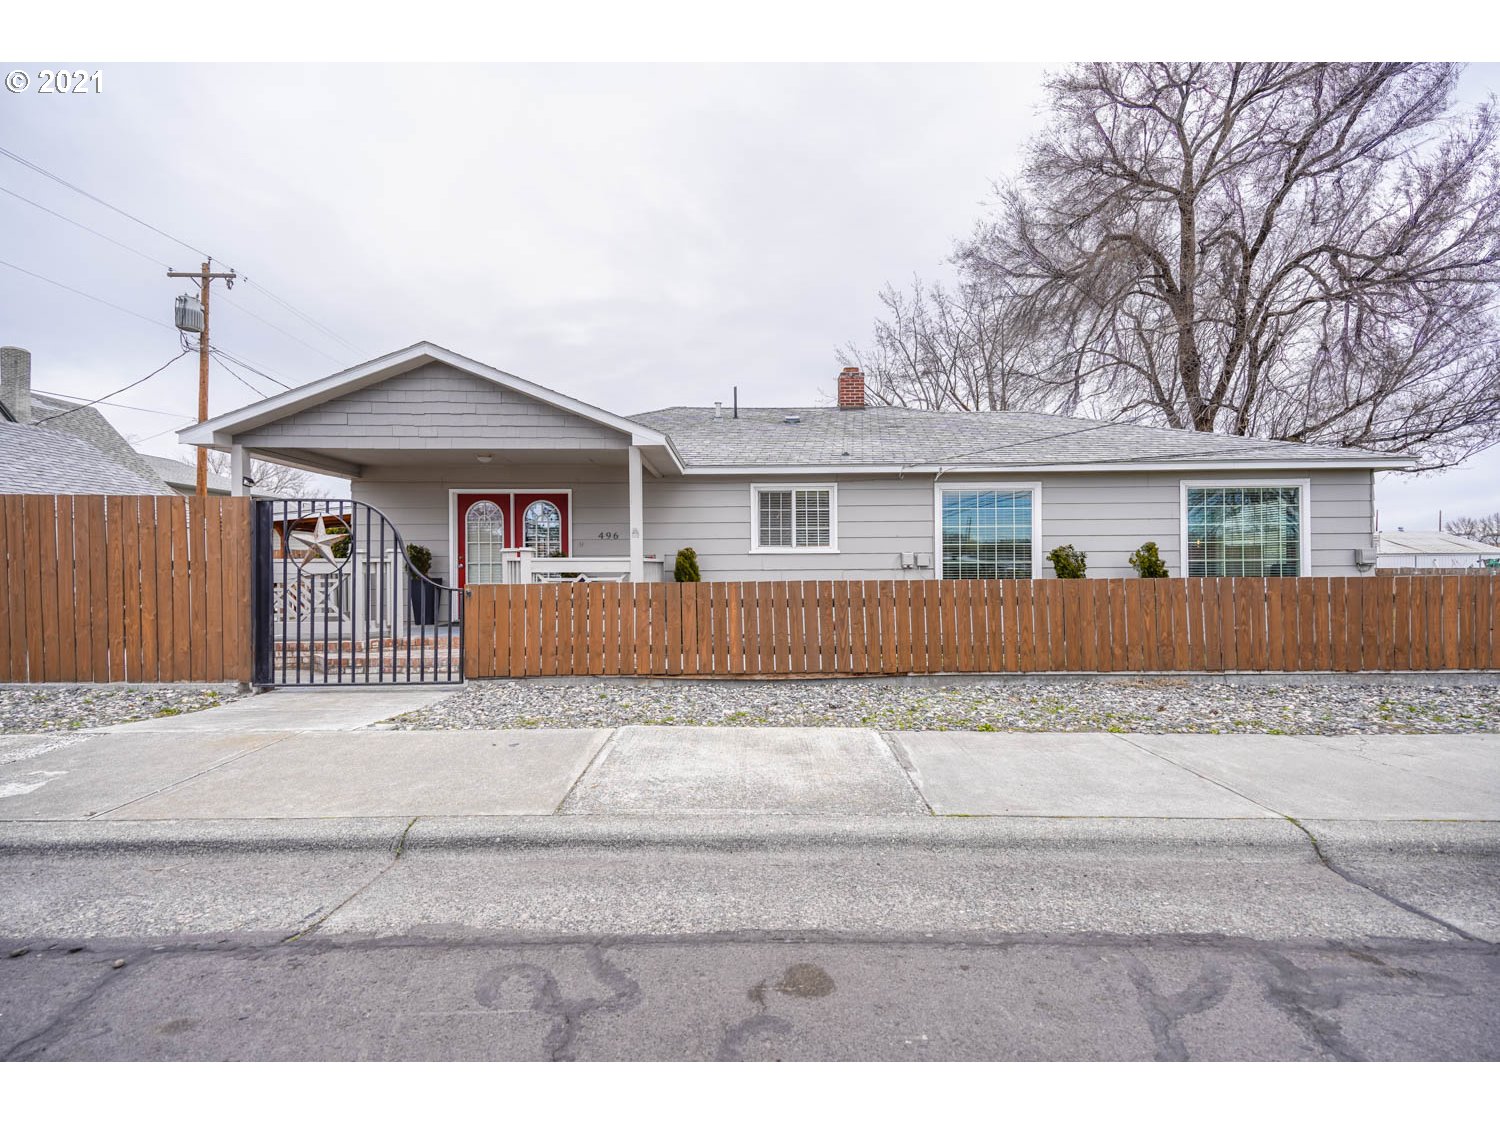 496 W ORCHARD AVE (1 of 26)